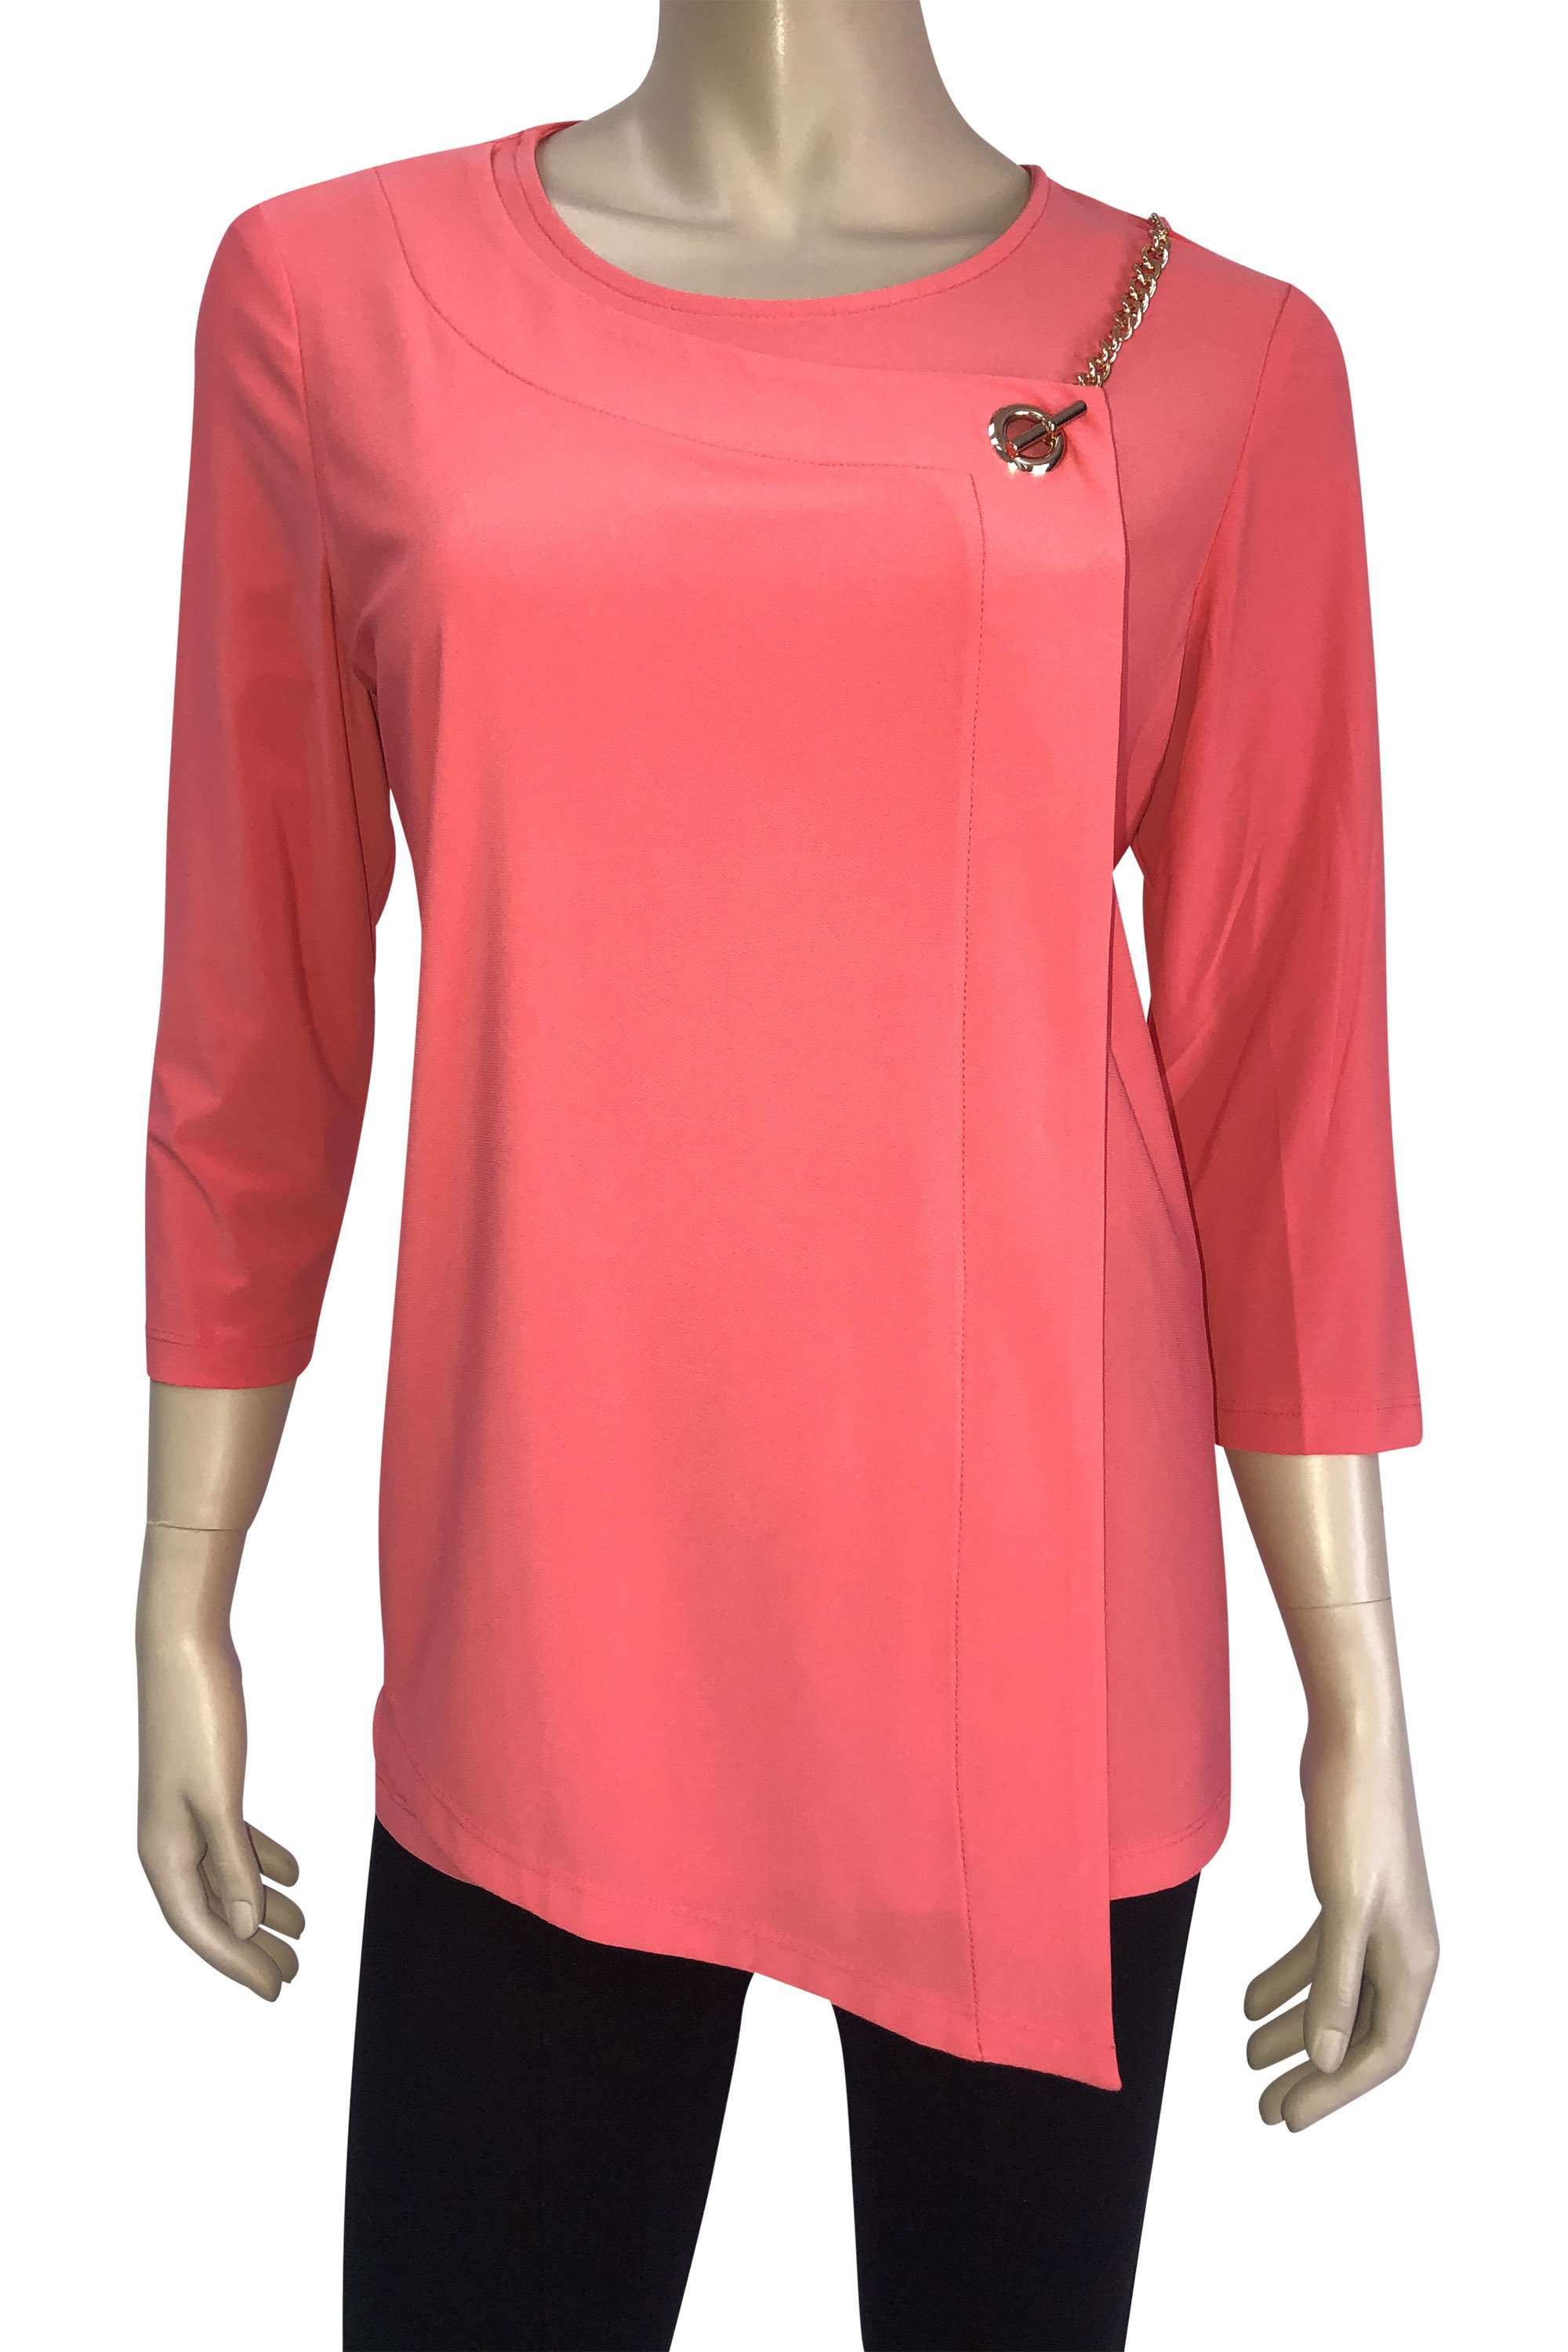 Women's Top Coral Stunning Design Flattering Fit Made in Canada - Yvonne Marie - Yvonne Marie